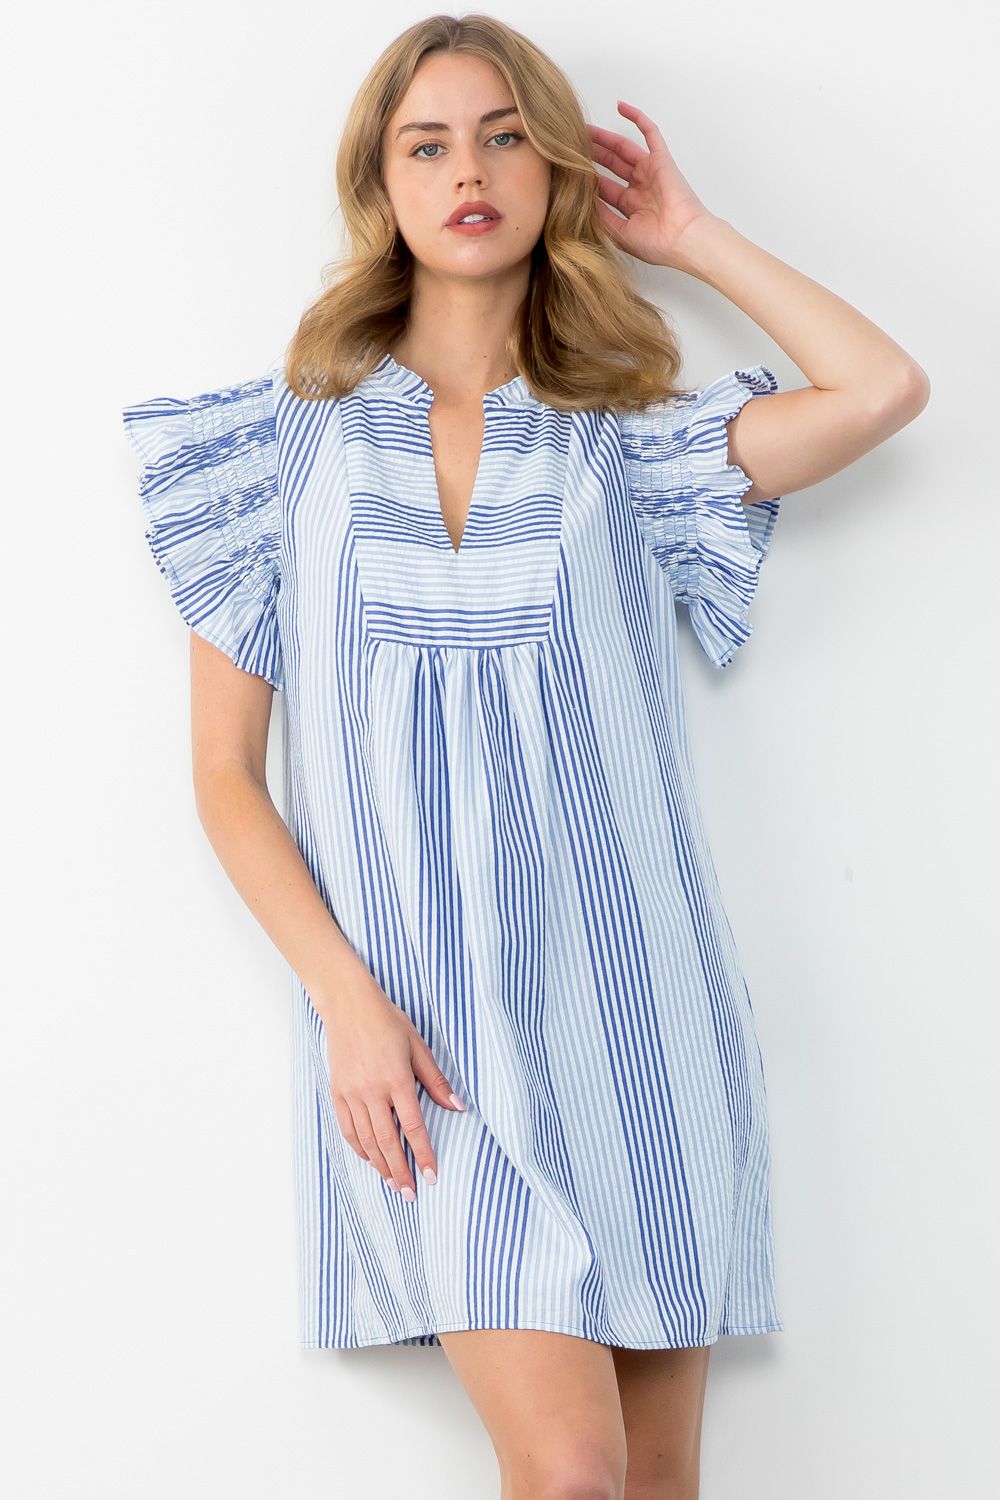 All Day Italy Striped Dress